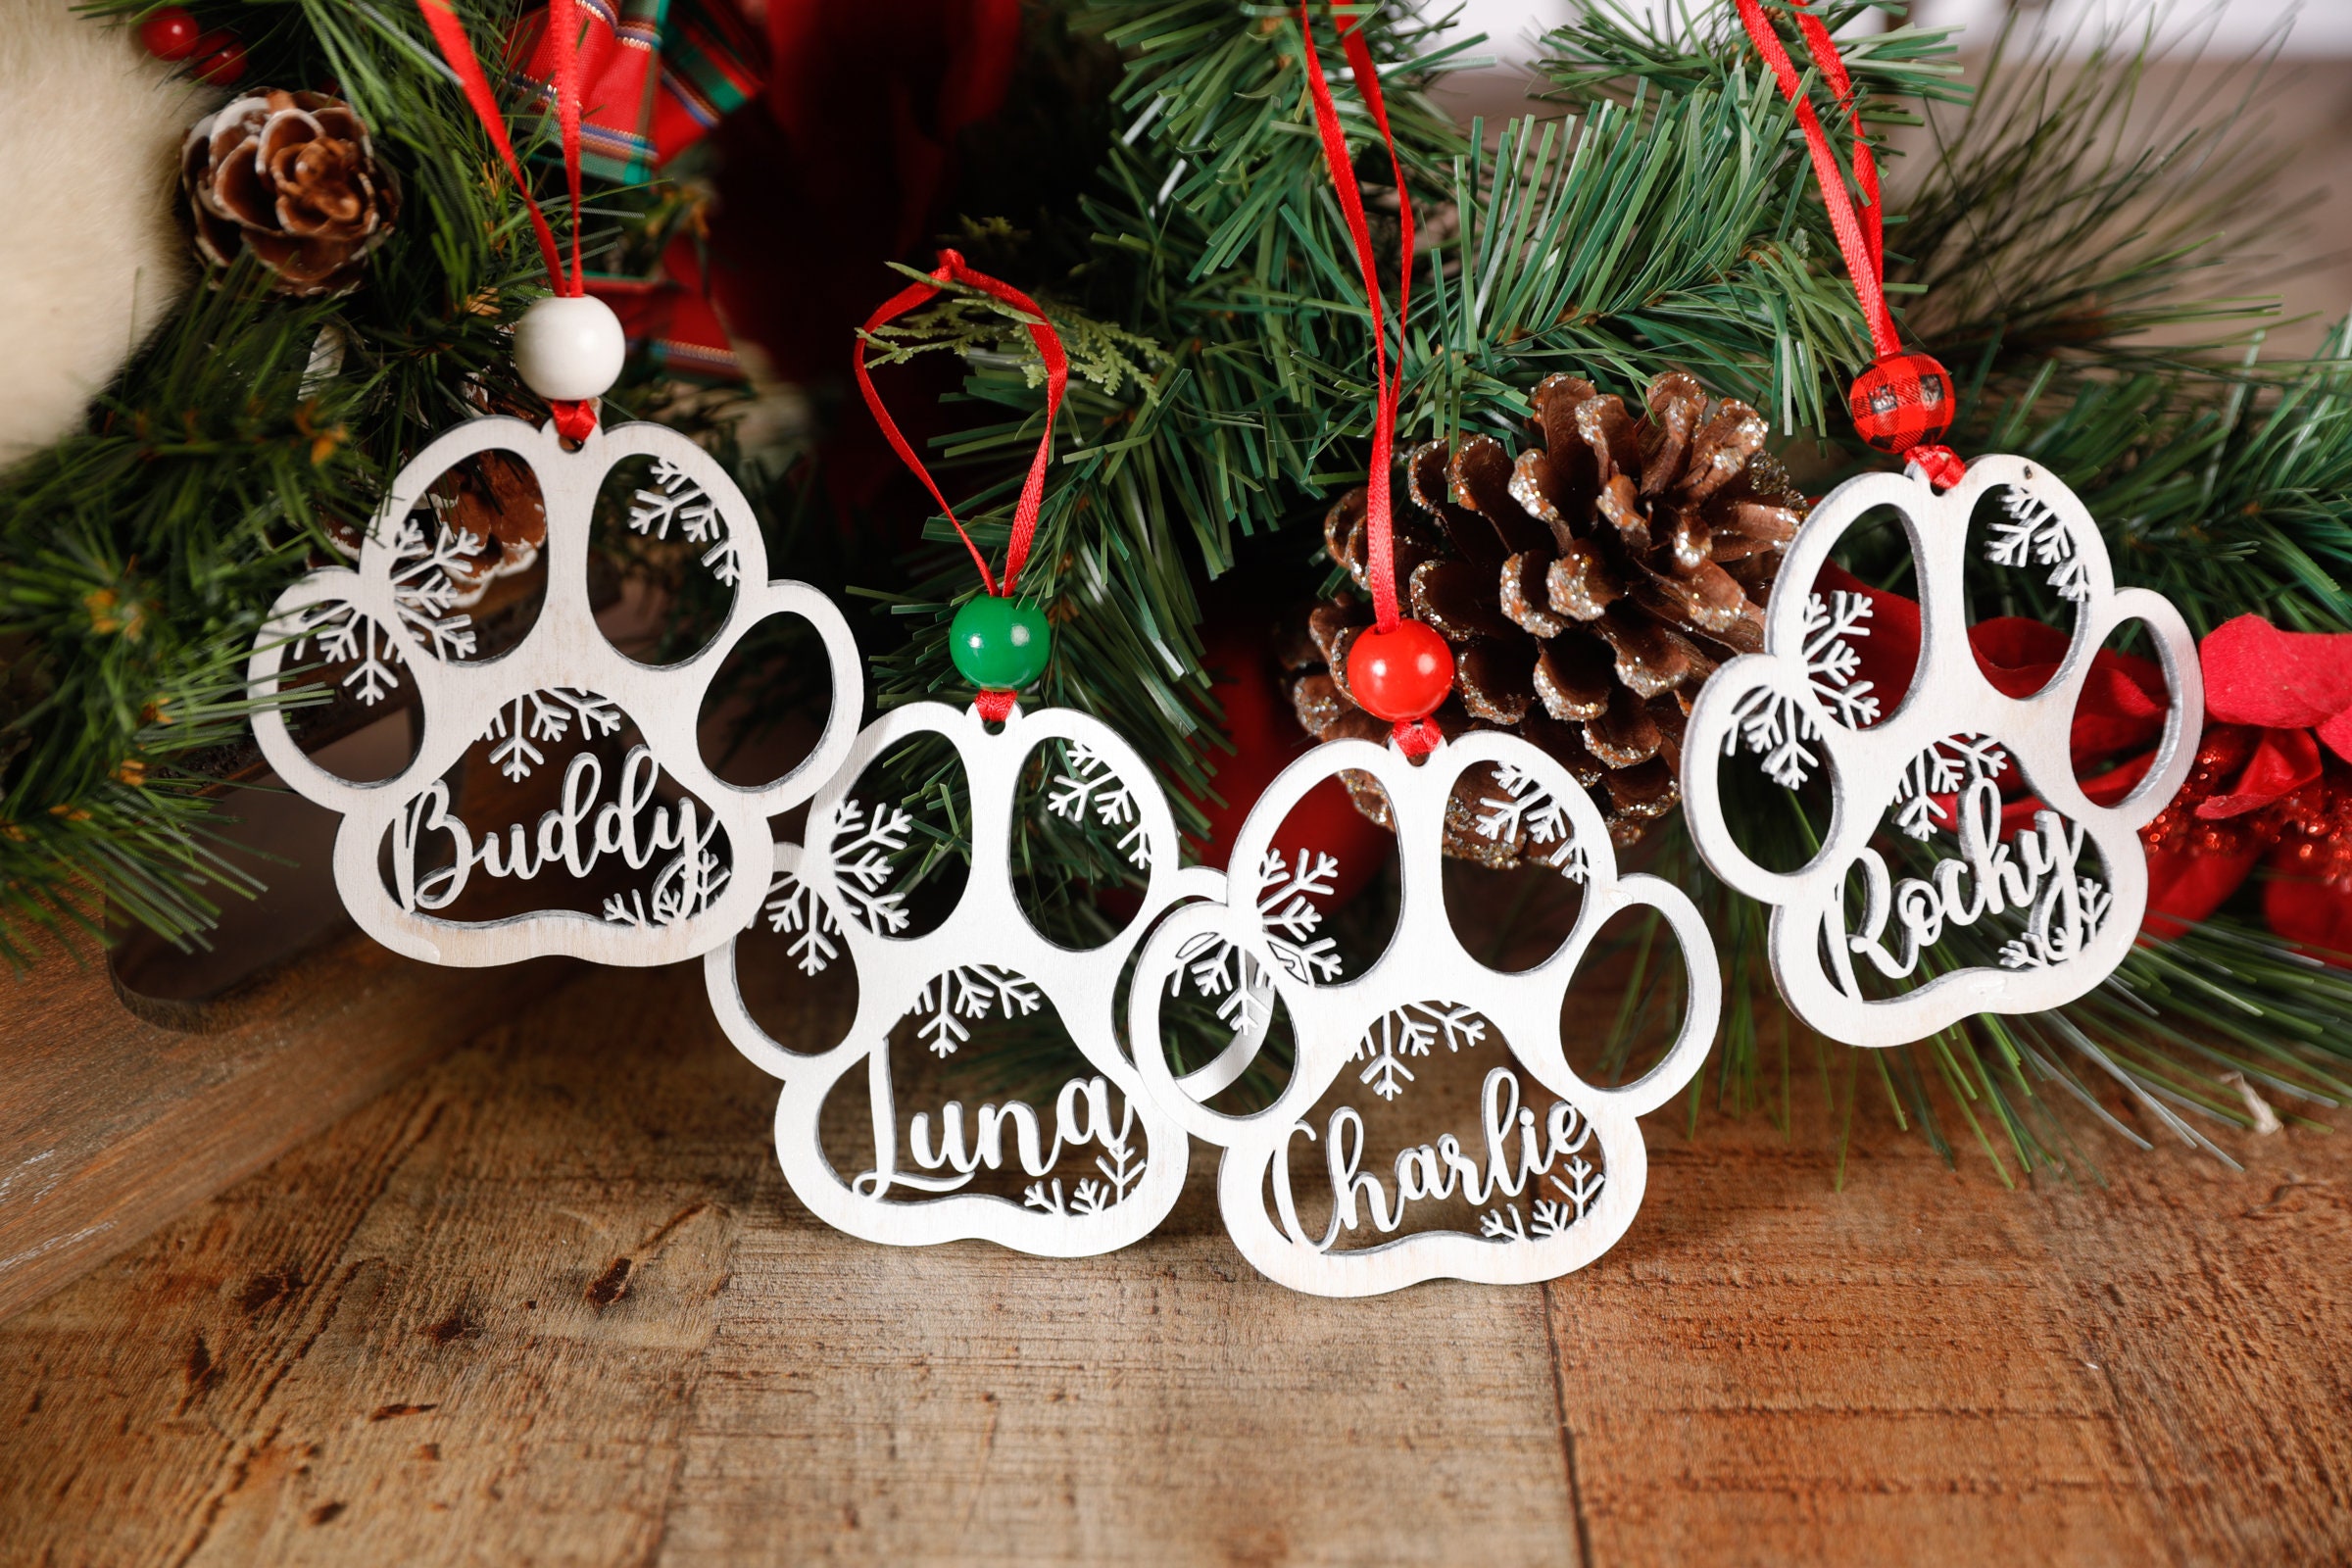 Personalized White Wood Ornaments - Christmas Ornament – The Unique Work